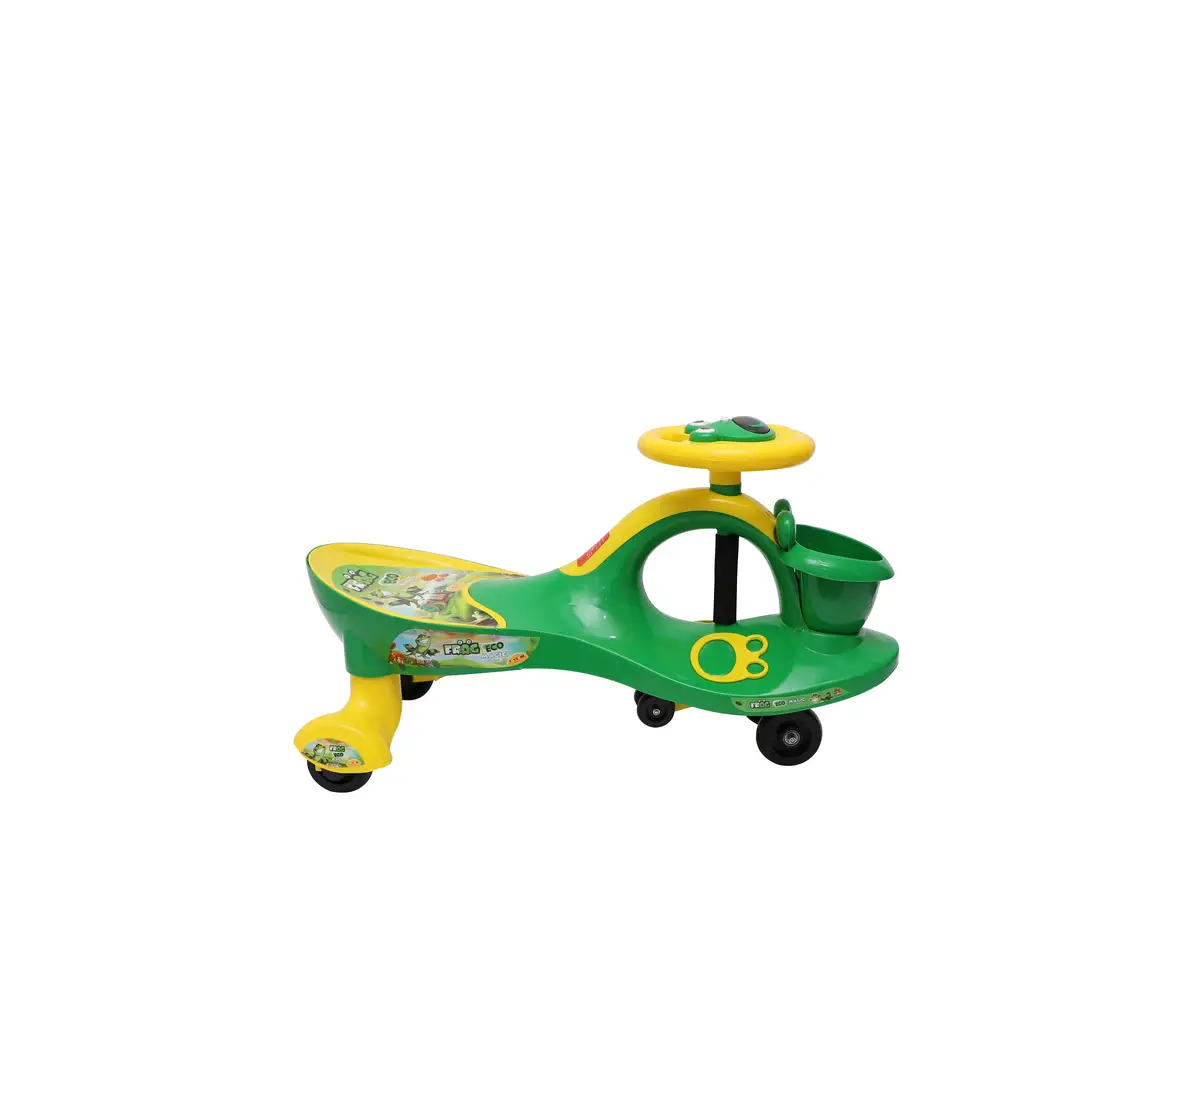 Toyzone Eco Frog Magic Car 53415 Green and Yellow, 2Y+